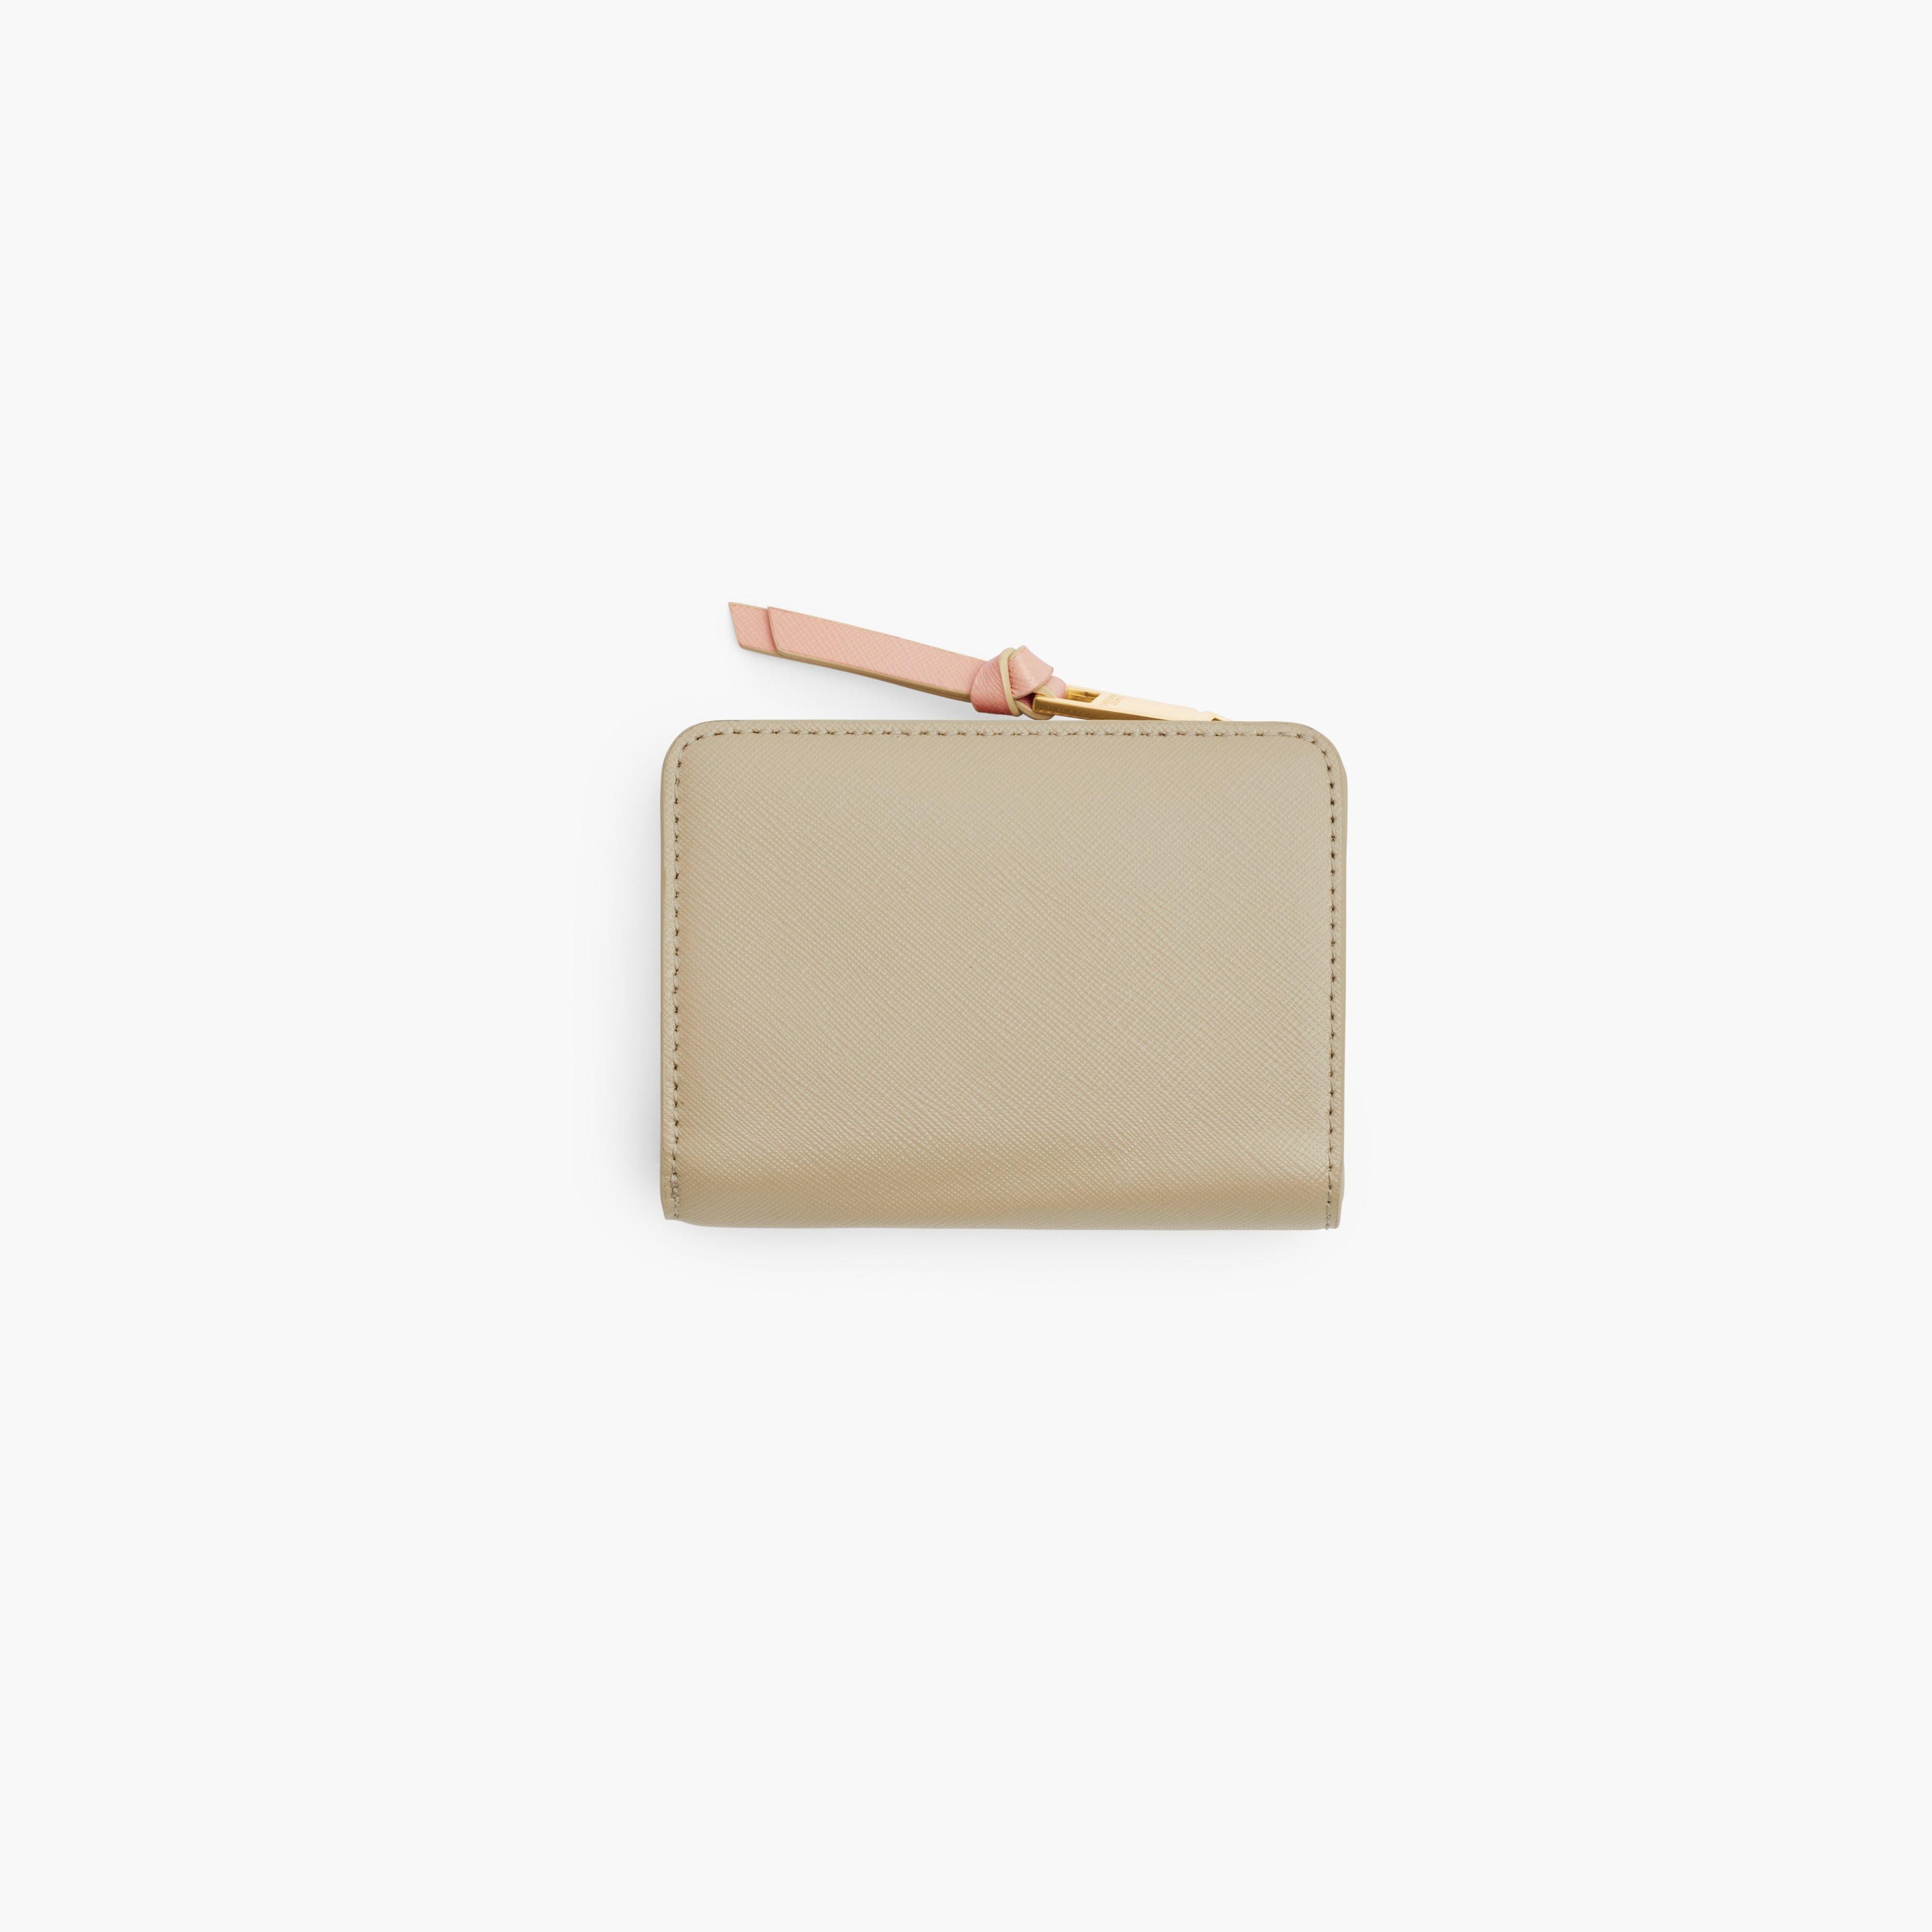 THE UTILITY SNAPSHOT MINI COMPACT WALLET - 3